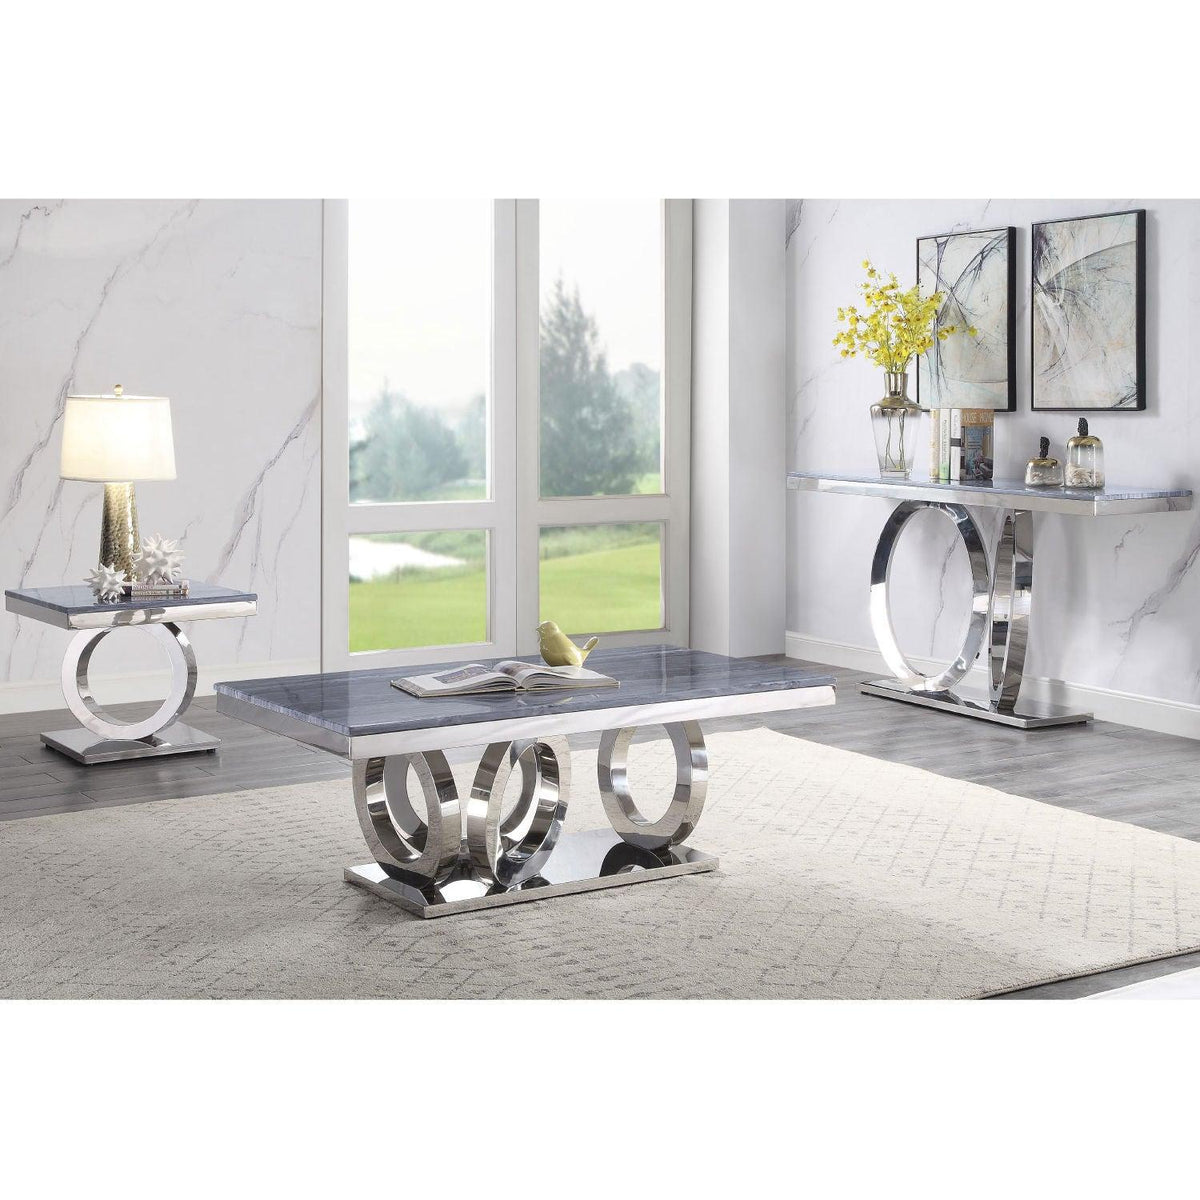 Zasir Gray Printed Faux Marble & Mirrored Silver Finish Table Set Zasir Gray Printed Faux Marble & Mirrored Silver Finish Table Set Half Price Furniture